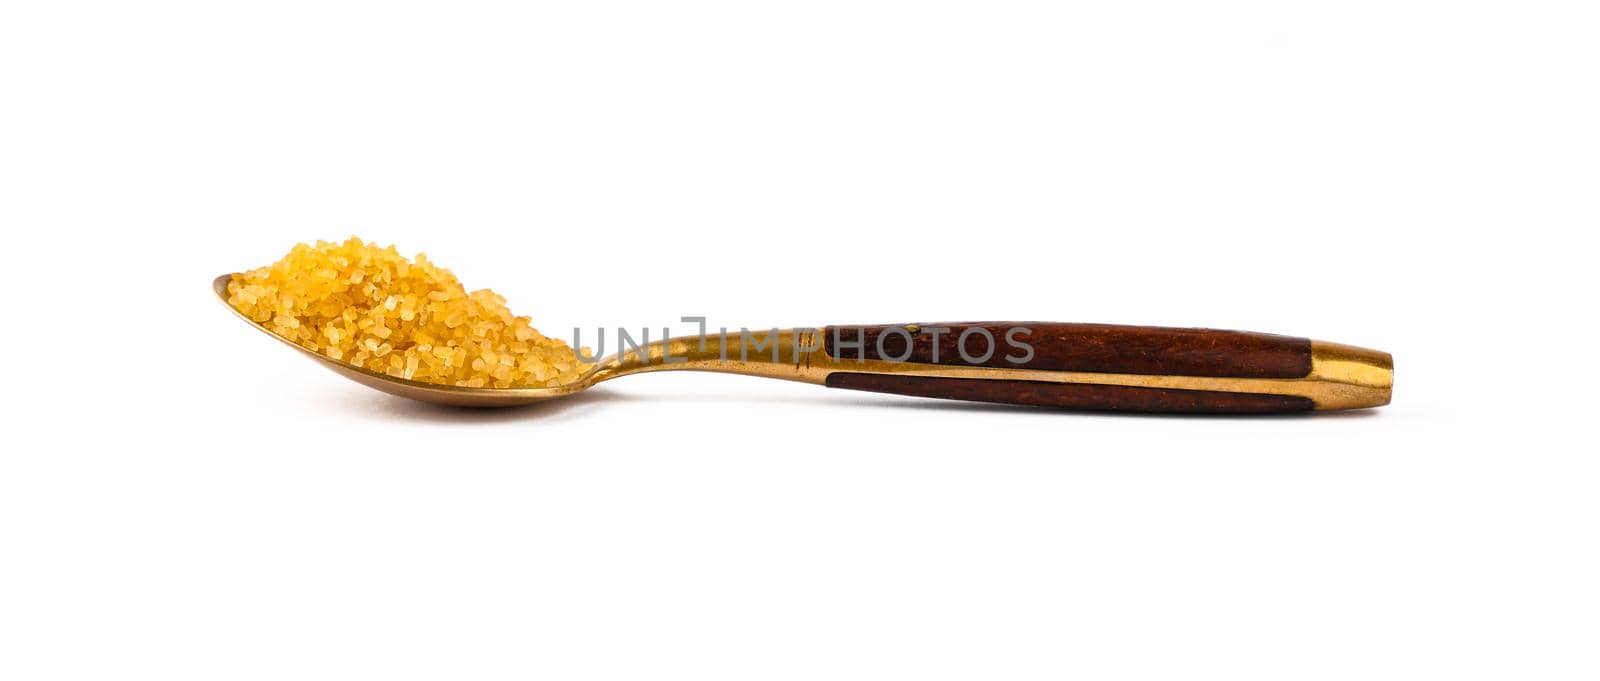 Close up one vintage golden metal spoon with wooden handle full of raw brown cane sugar, isolated on white background, low angle, side view